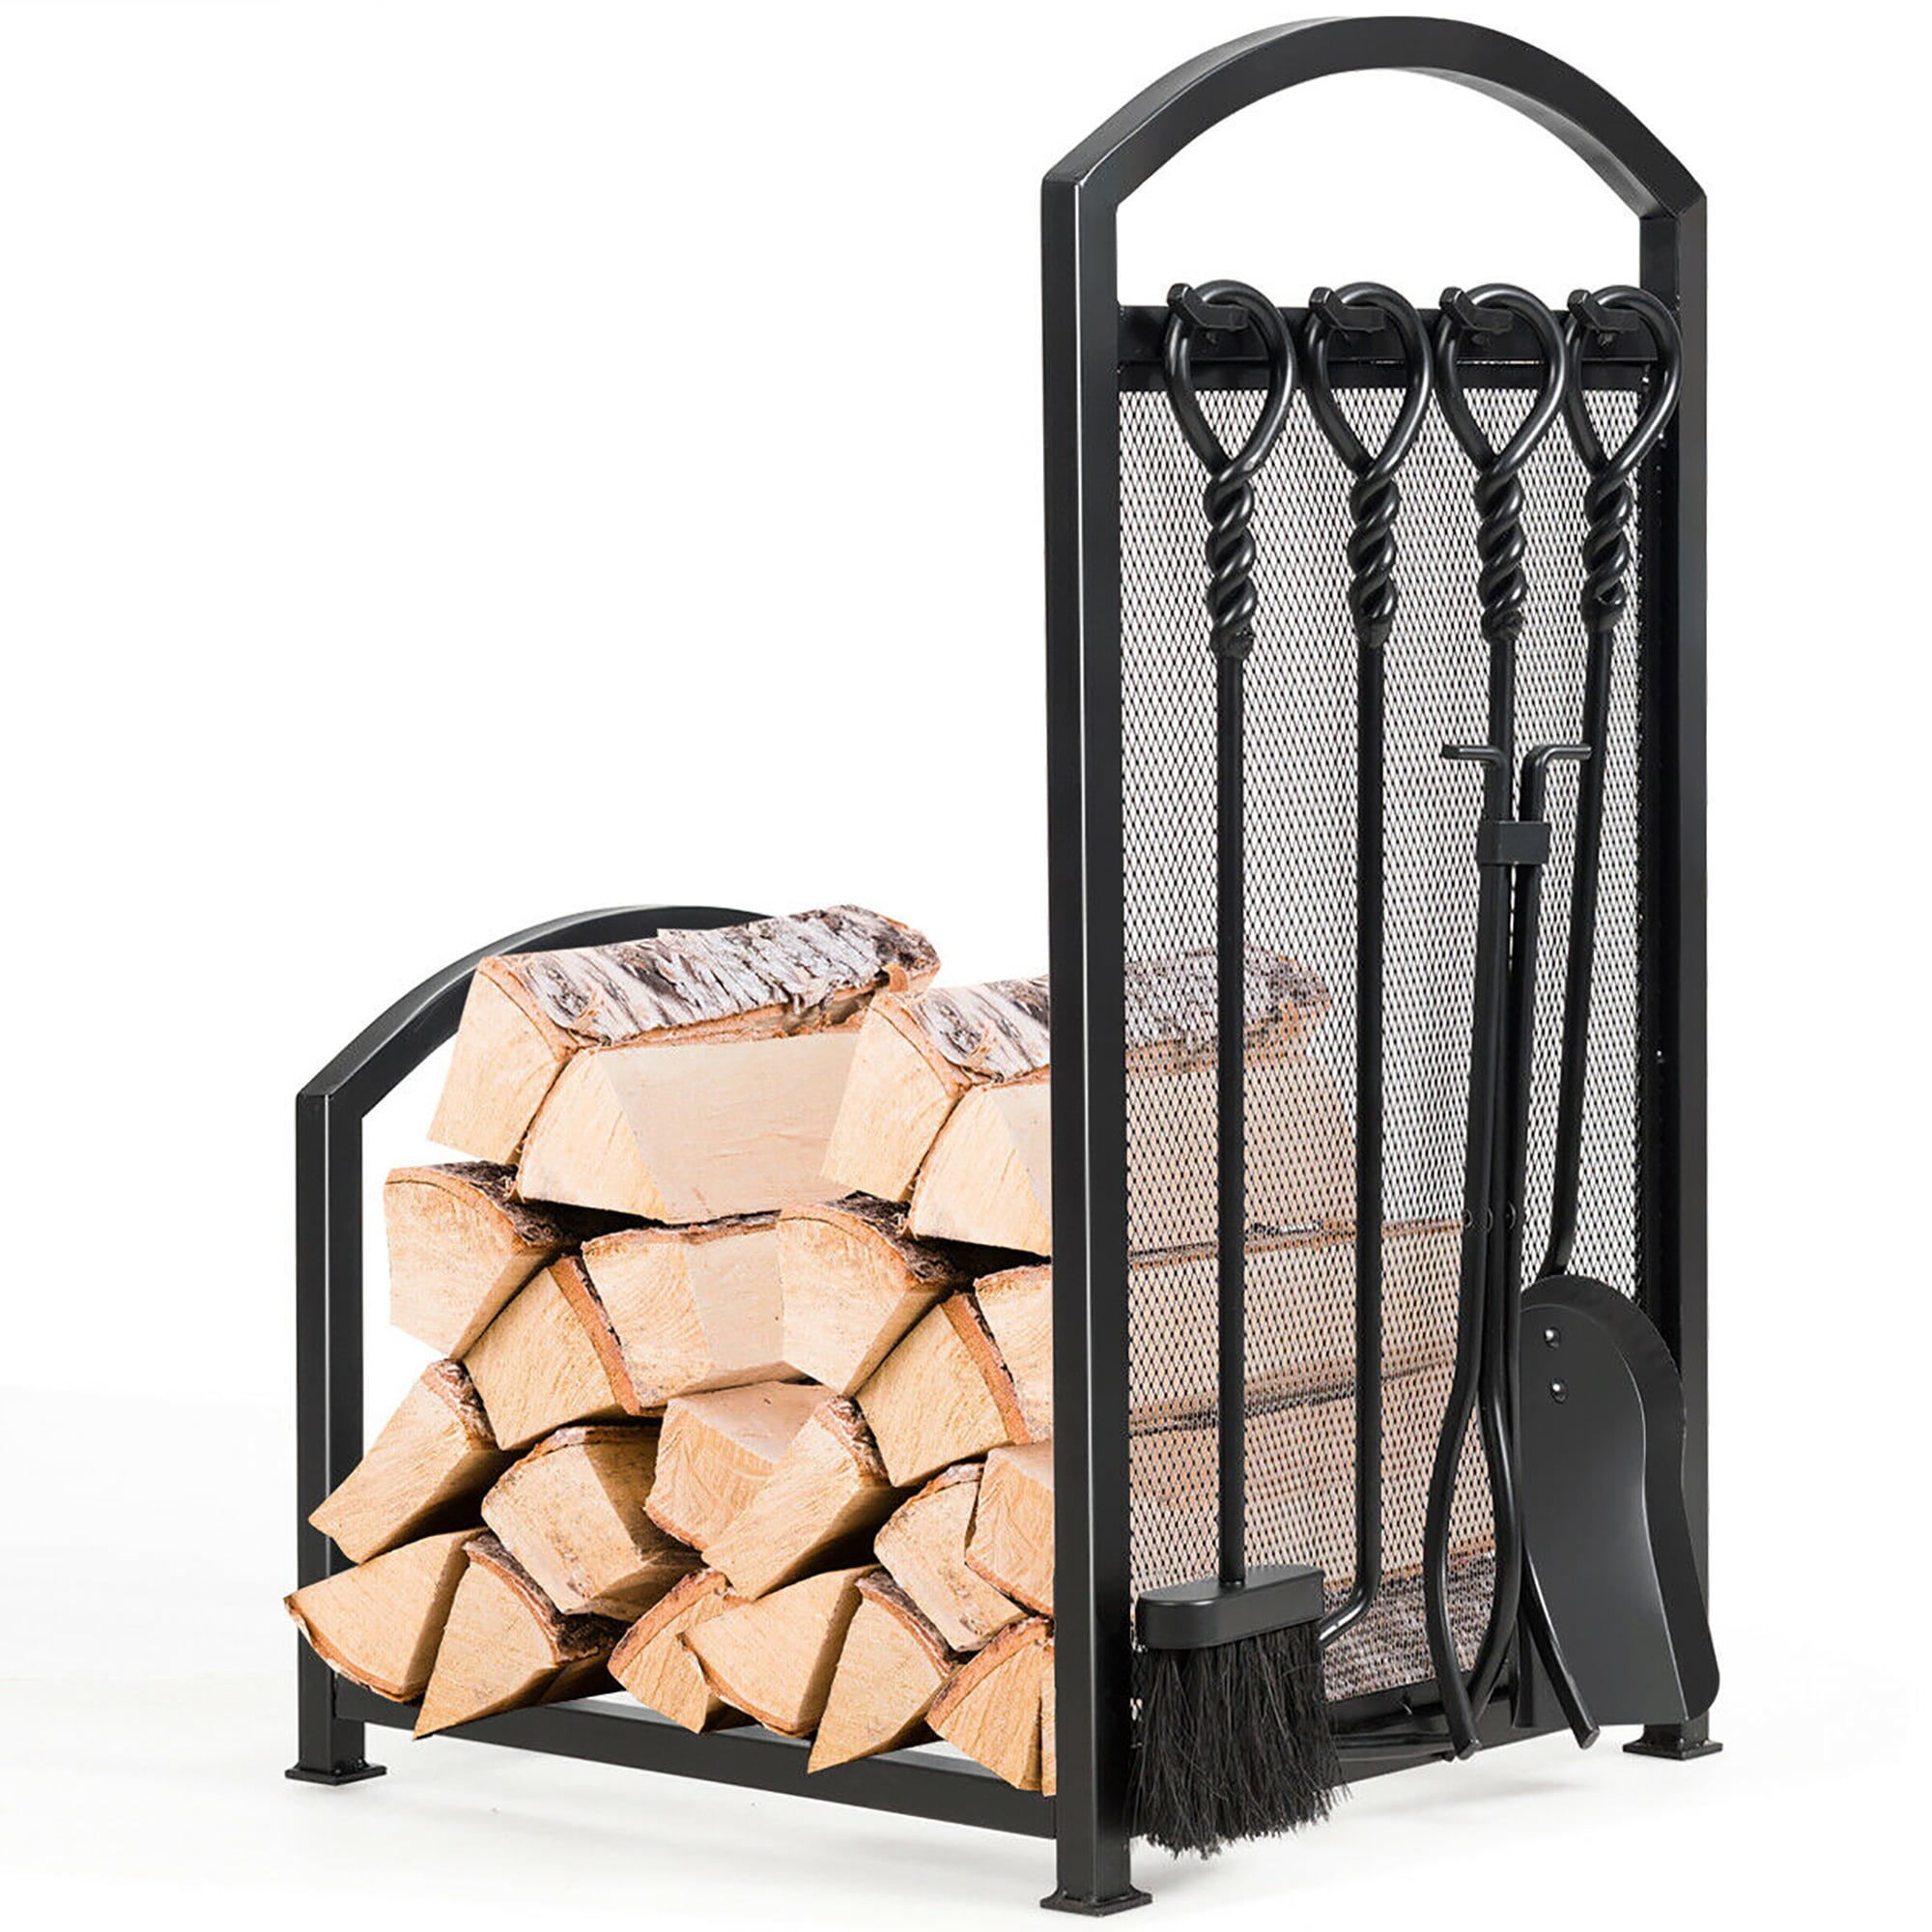 Brush Shovel DORTALA Firewood Log Rack with 4 Tools and Poker for Outdoor or Indoor Use Fireplace Log Storage Holder Set w//Heavy-Duty Steel Frame 5 Pieces Lumber Stacker Set with Tong